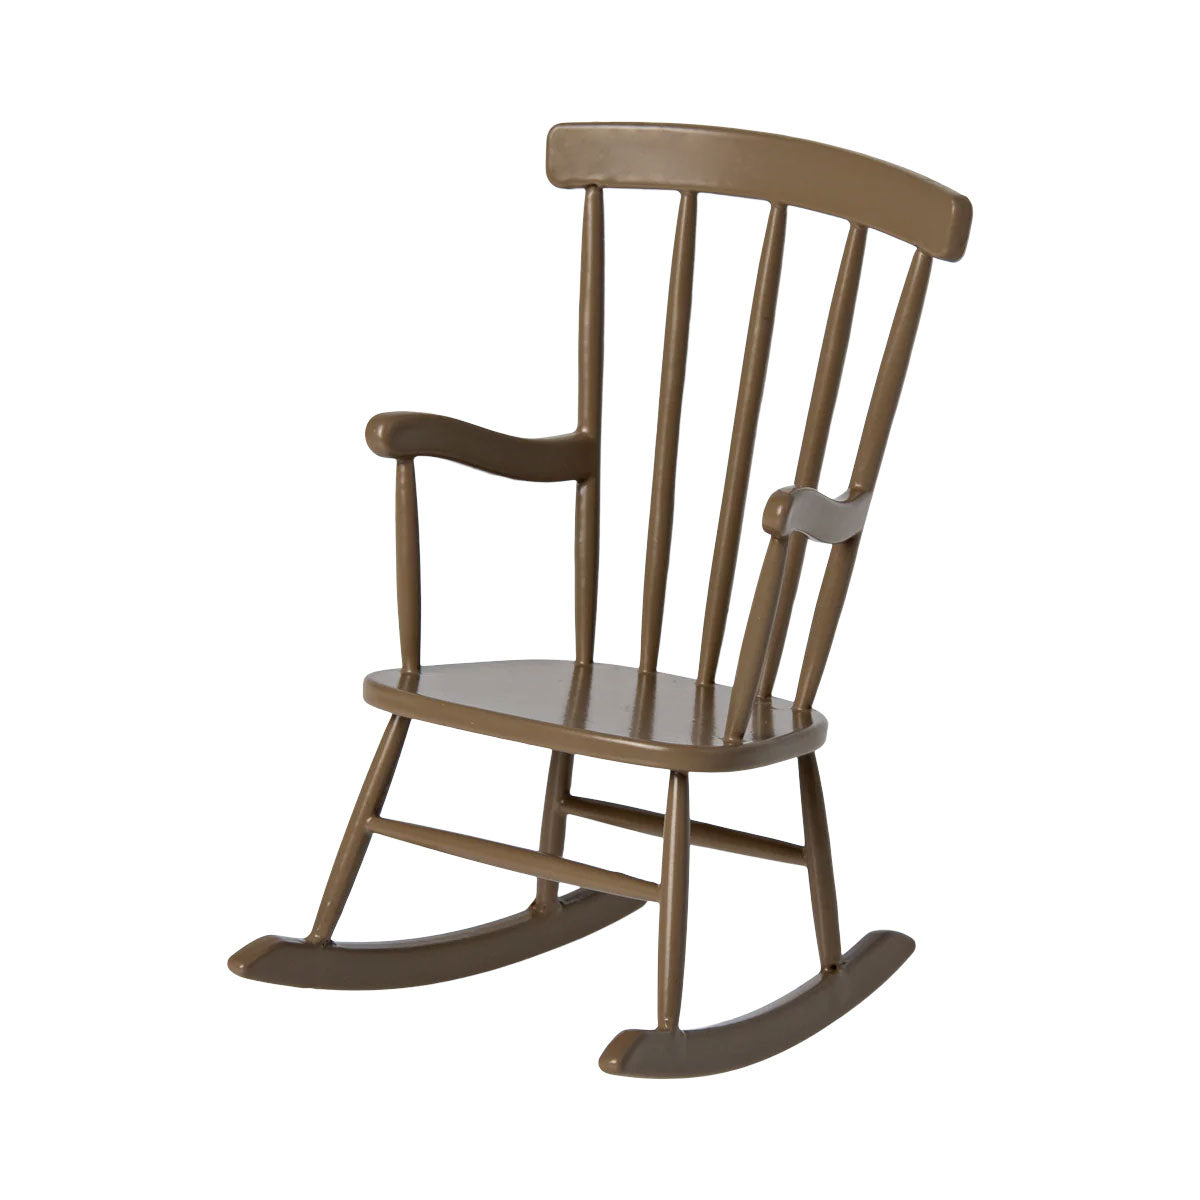 The luxurious Maileg Mouse Light Brown Rocking Chair with optimal arm rests - jealous?